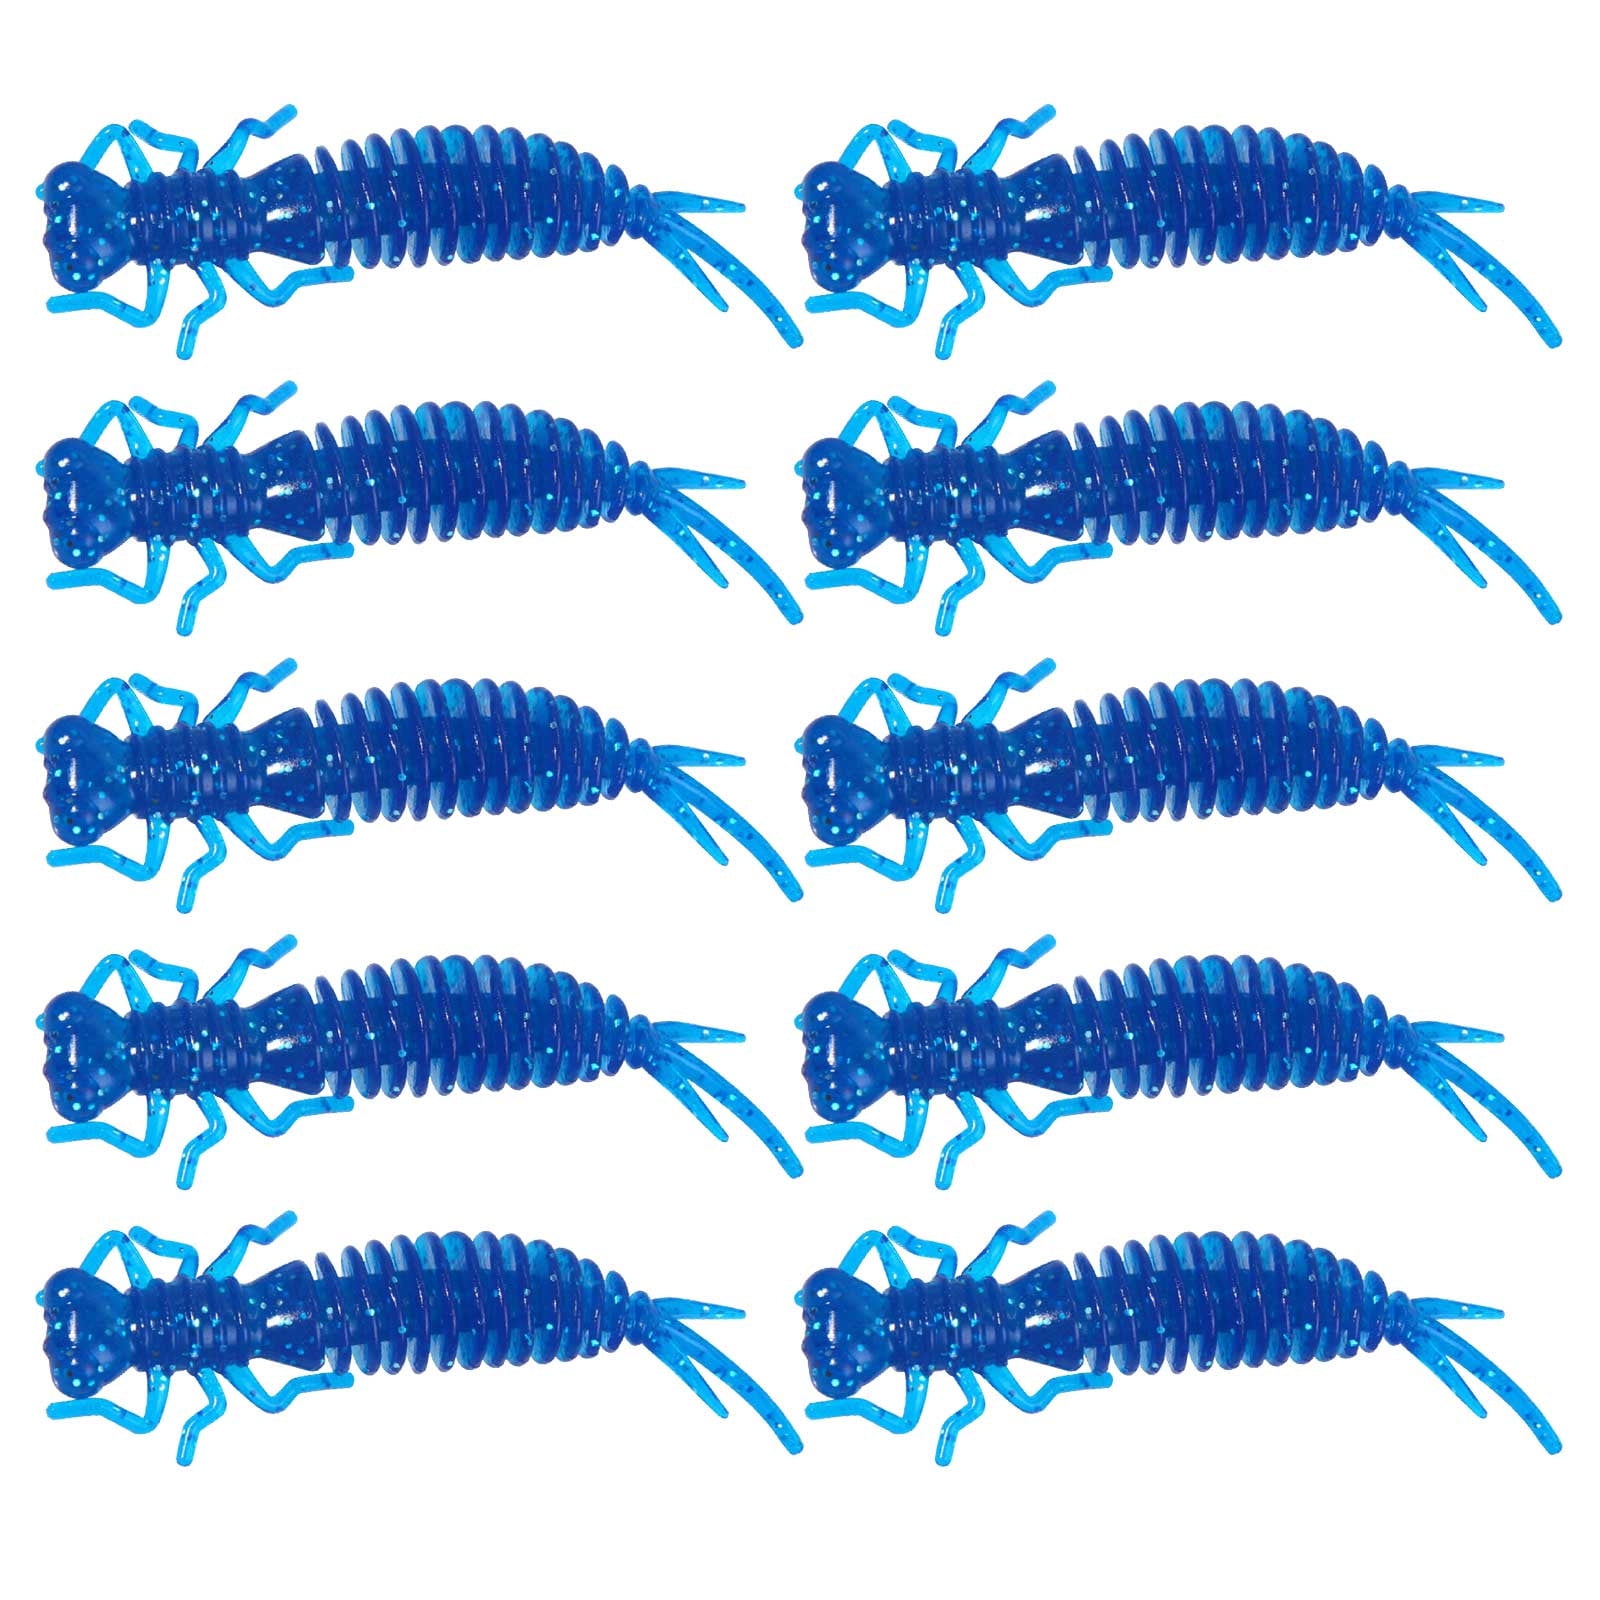 RTGSE 60pcs Dragonfly Larva Soft Silicone Lures for Bass, Trout